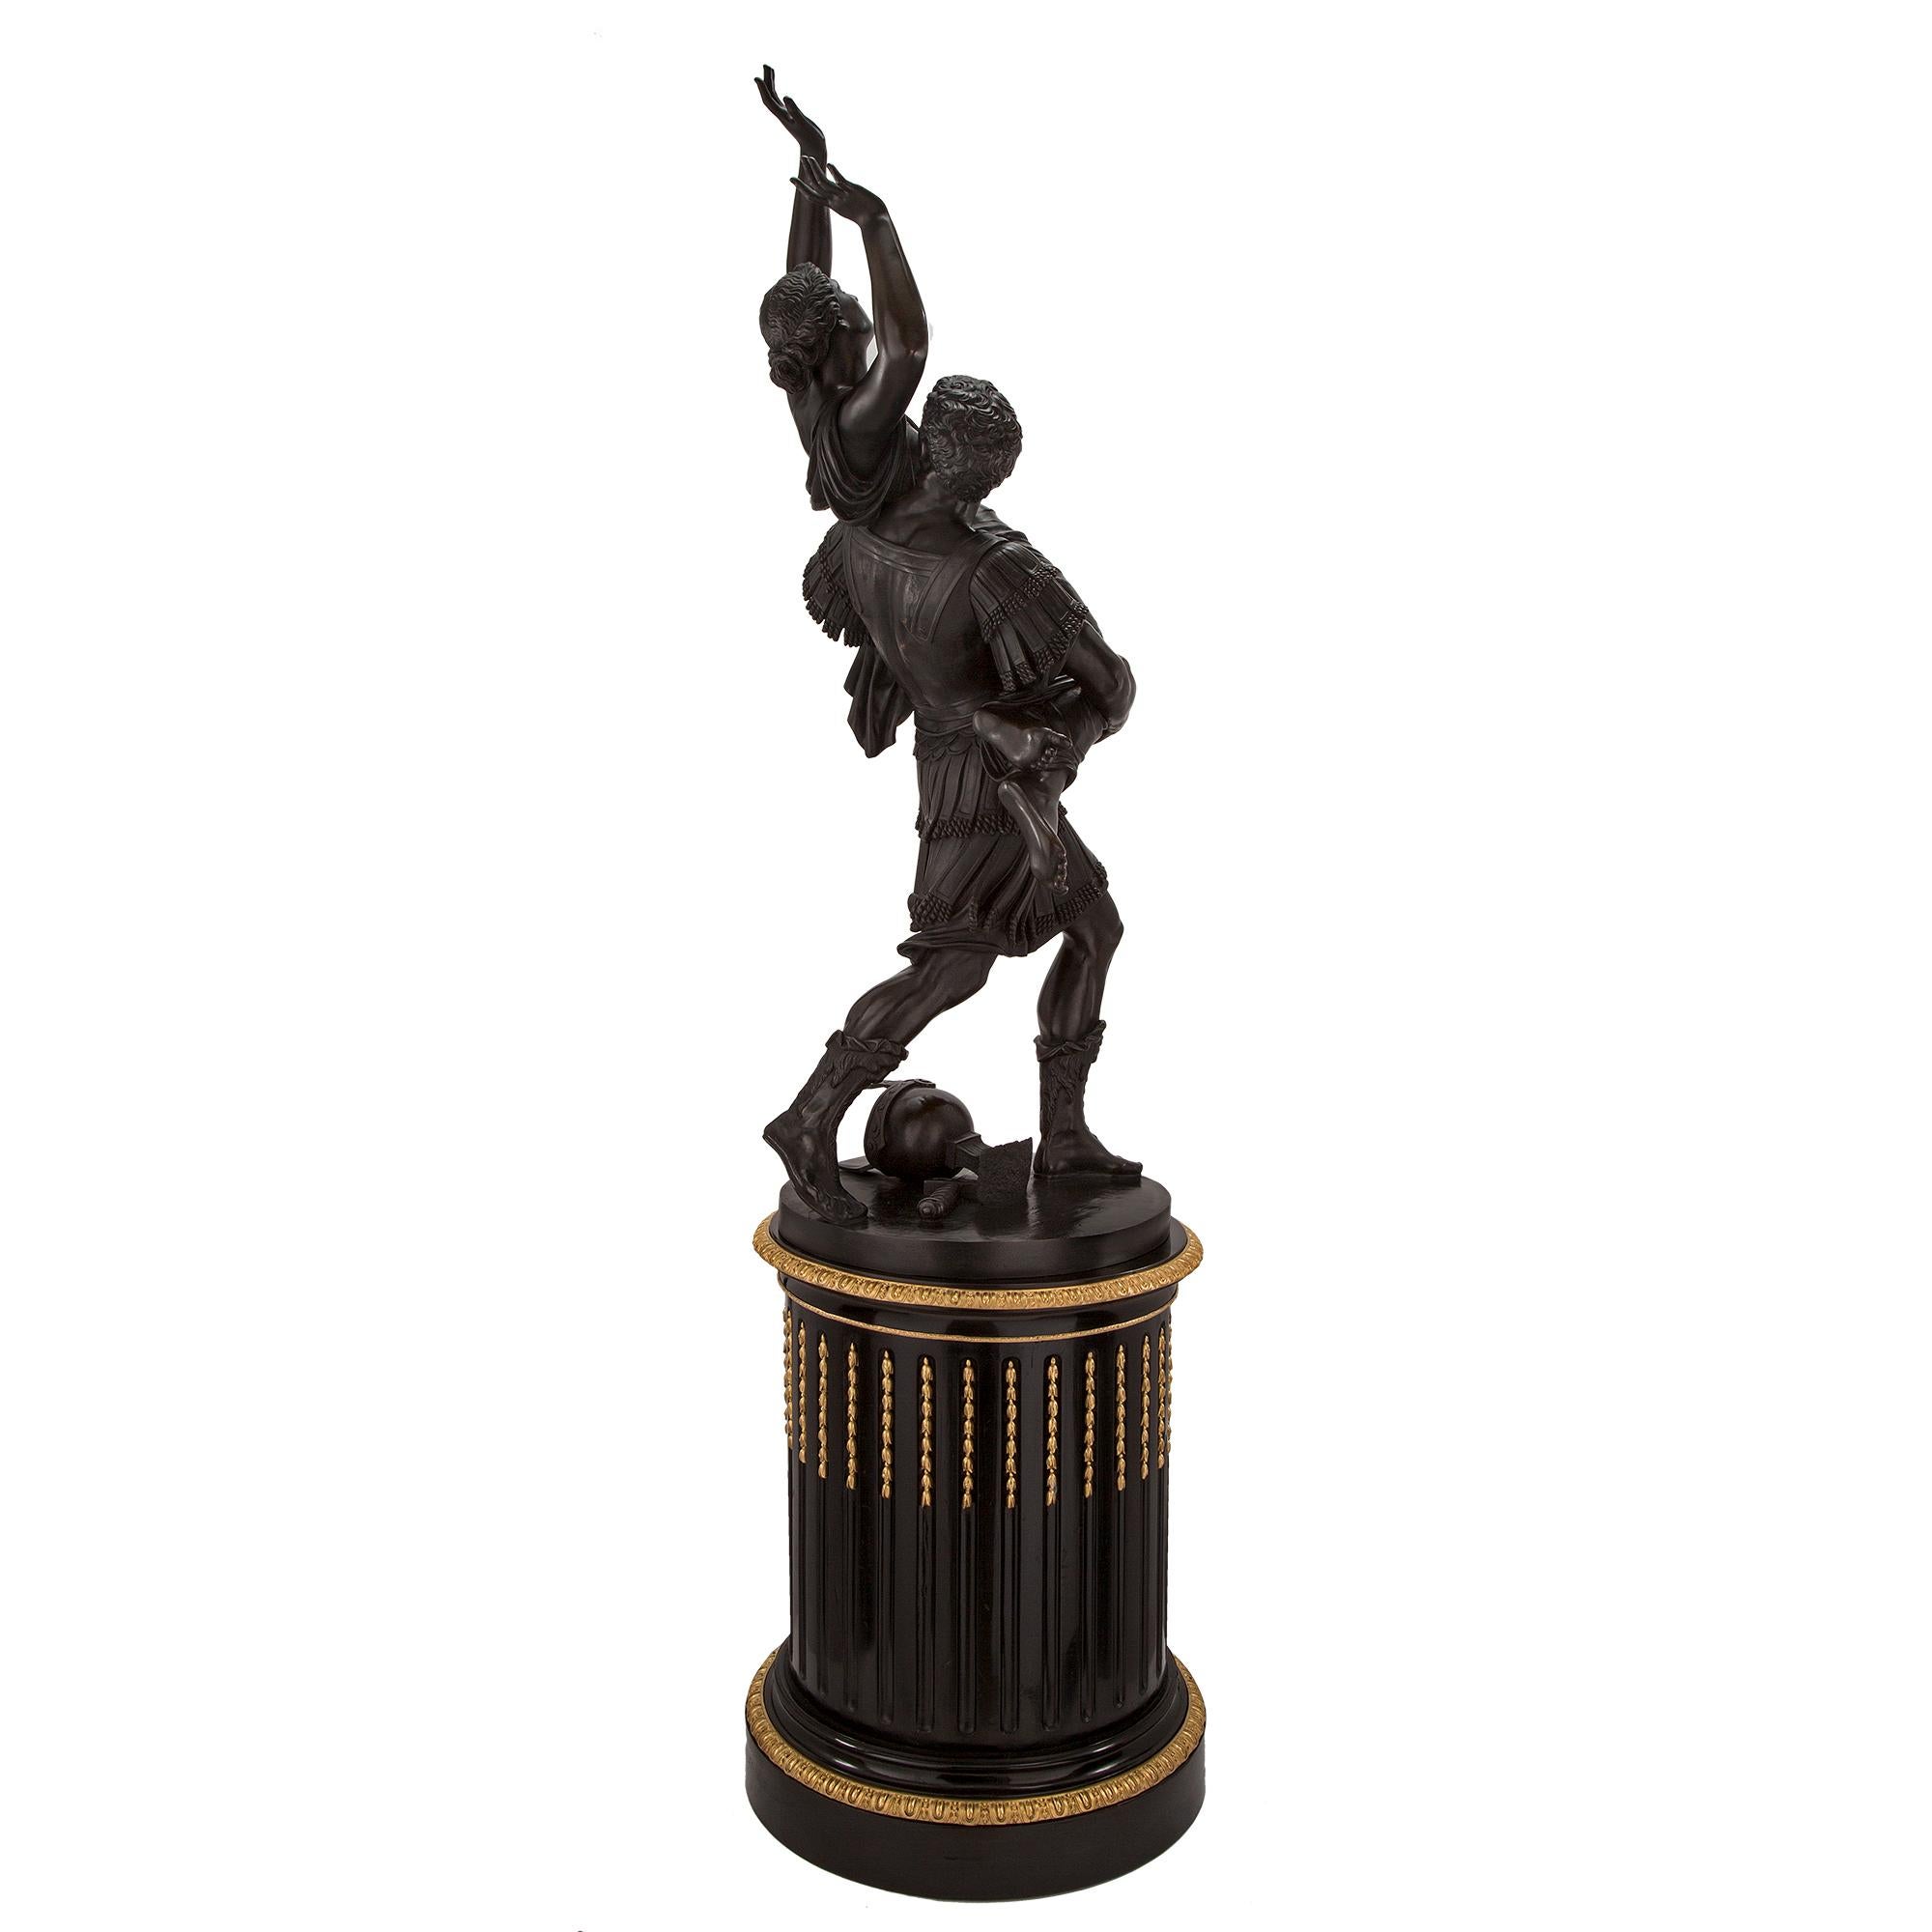 A sensational and large scale French 19th century Louis XVI st. bronze statue of L'Enlevement des Sabines on its original Base. The high quality bronze is raised by a circular fluted ebony base with fine and most decorative ormolu bands and striking